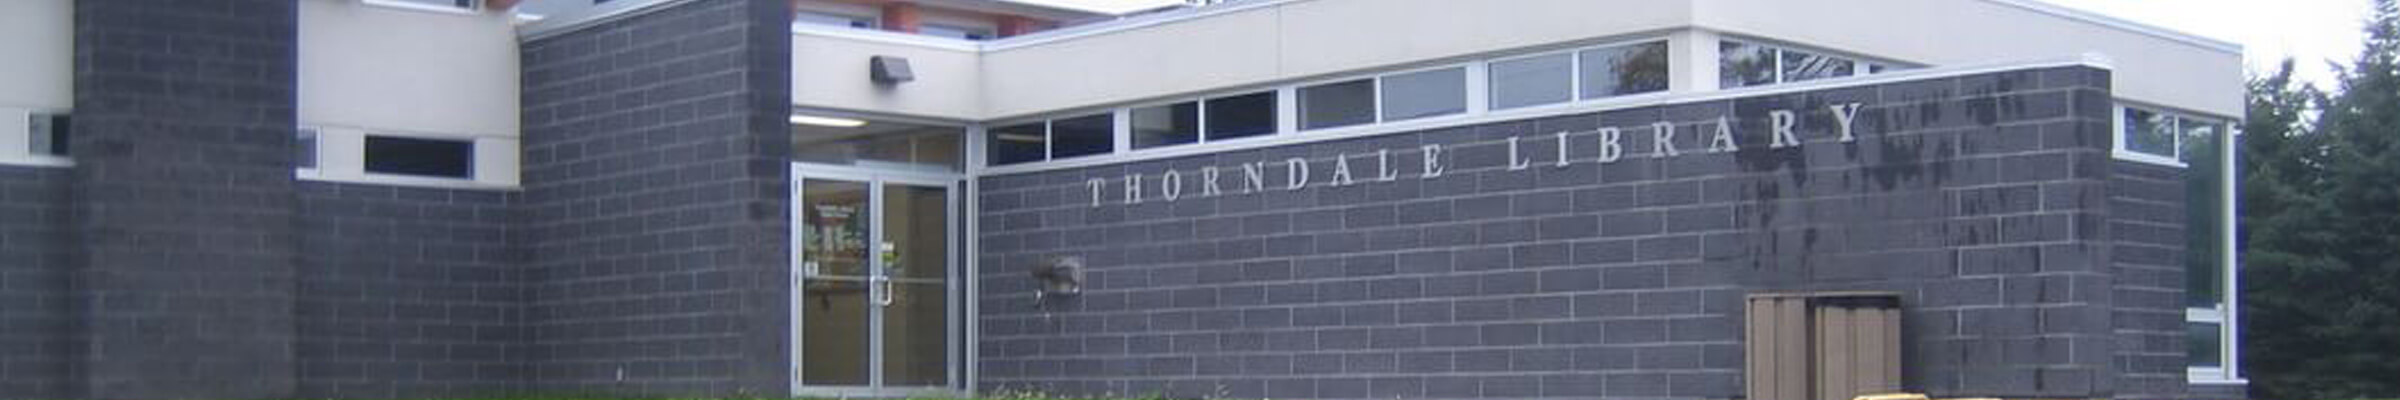 Thorndale Library